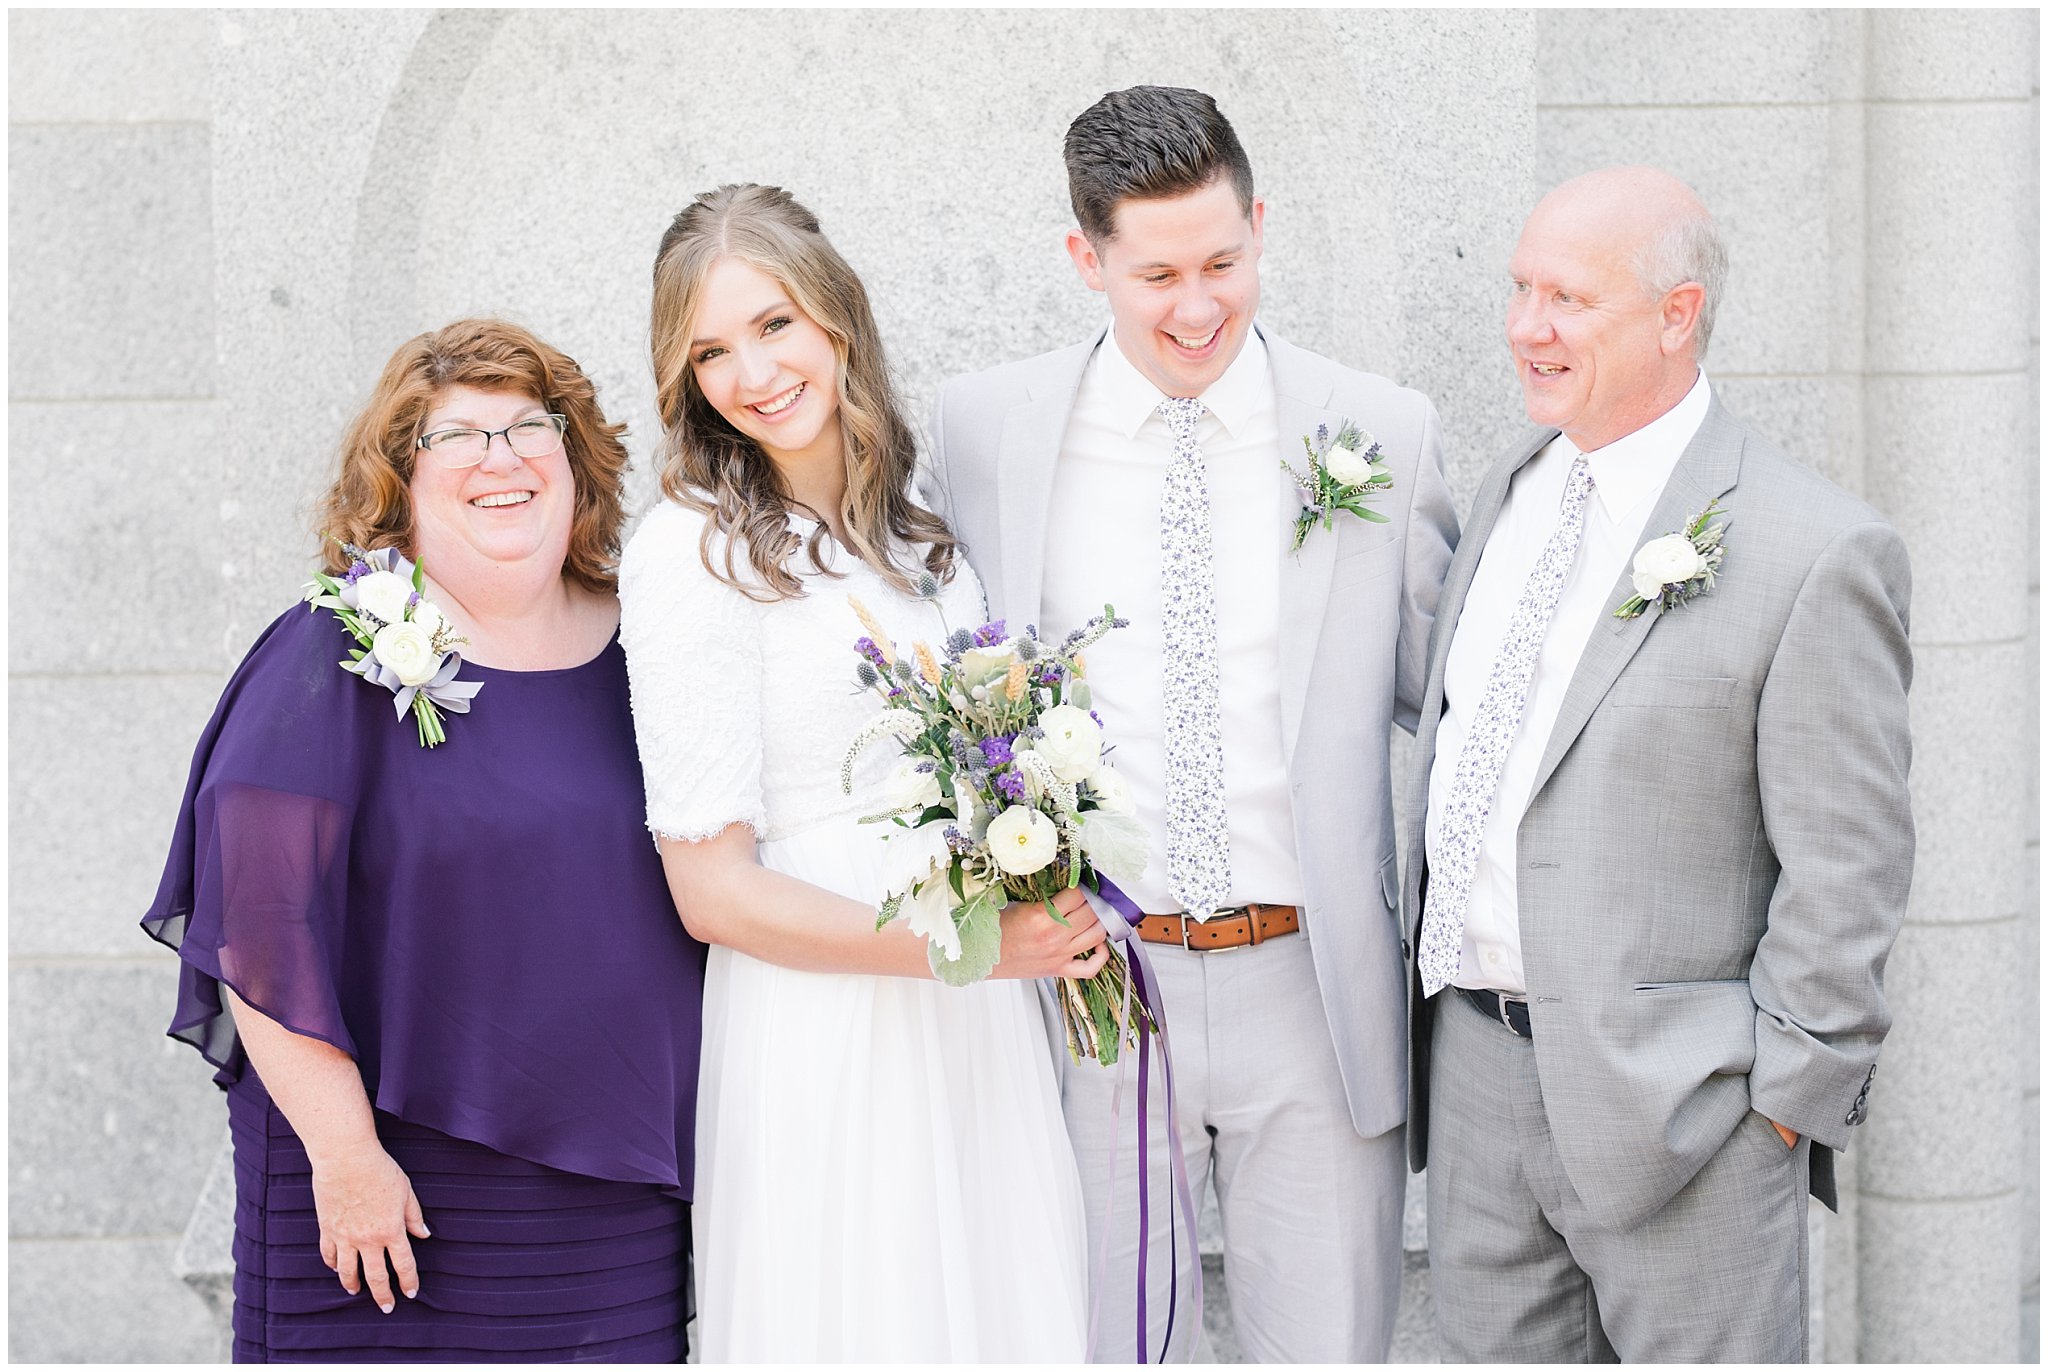 Fun and candid family photos at the temple during wedding | Salt Lake Temple Wedding and Clearfield City Hall Reception | Utah Wedding Photographers | Jessie and Dallin Photography